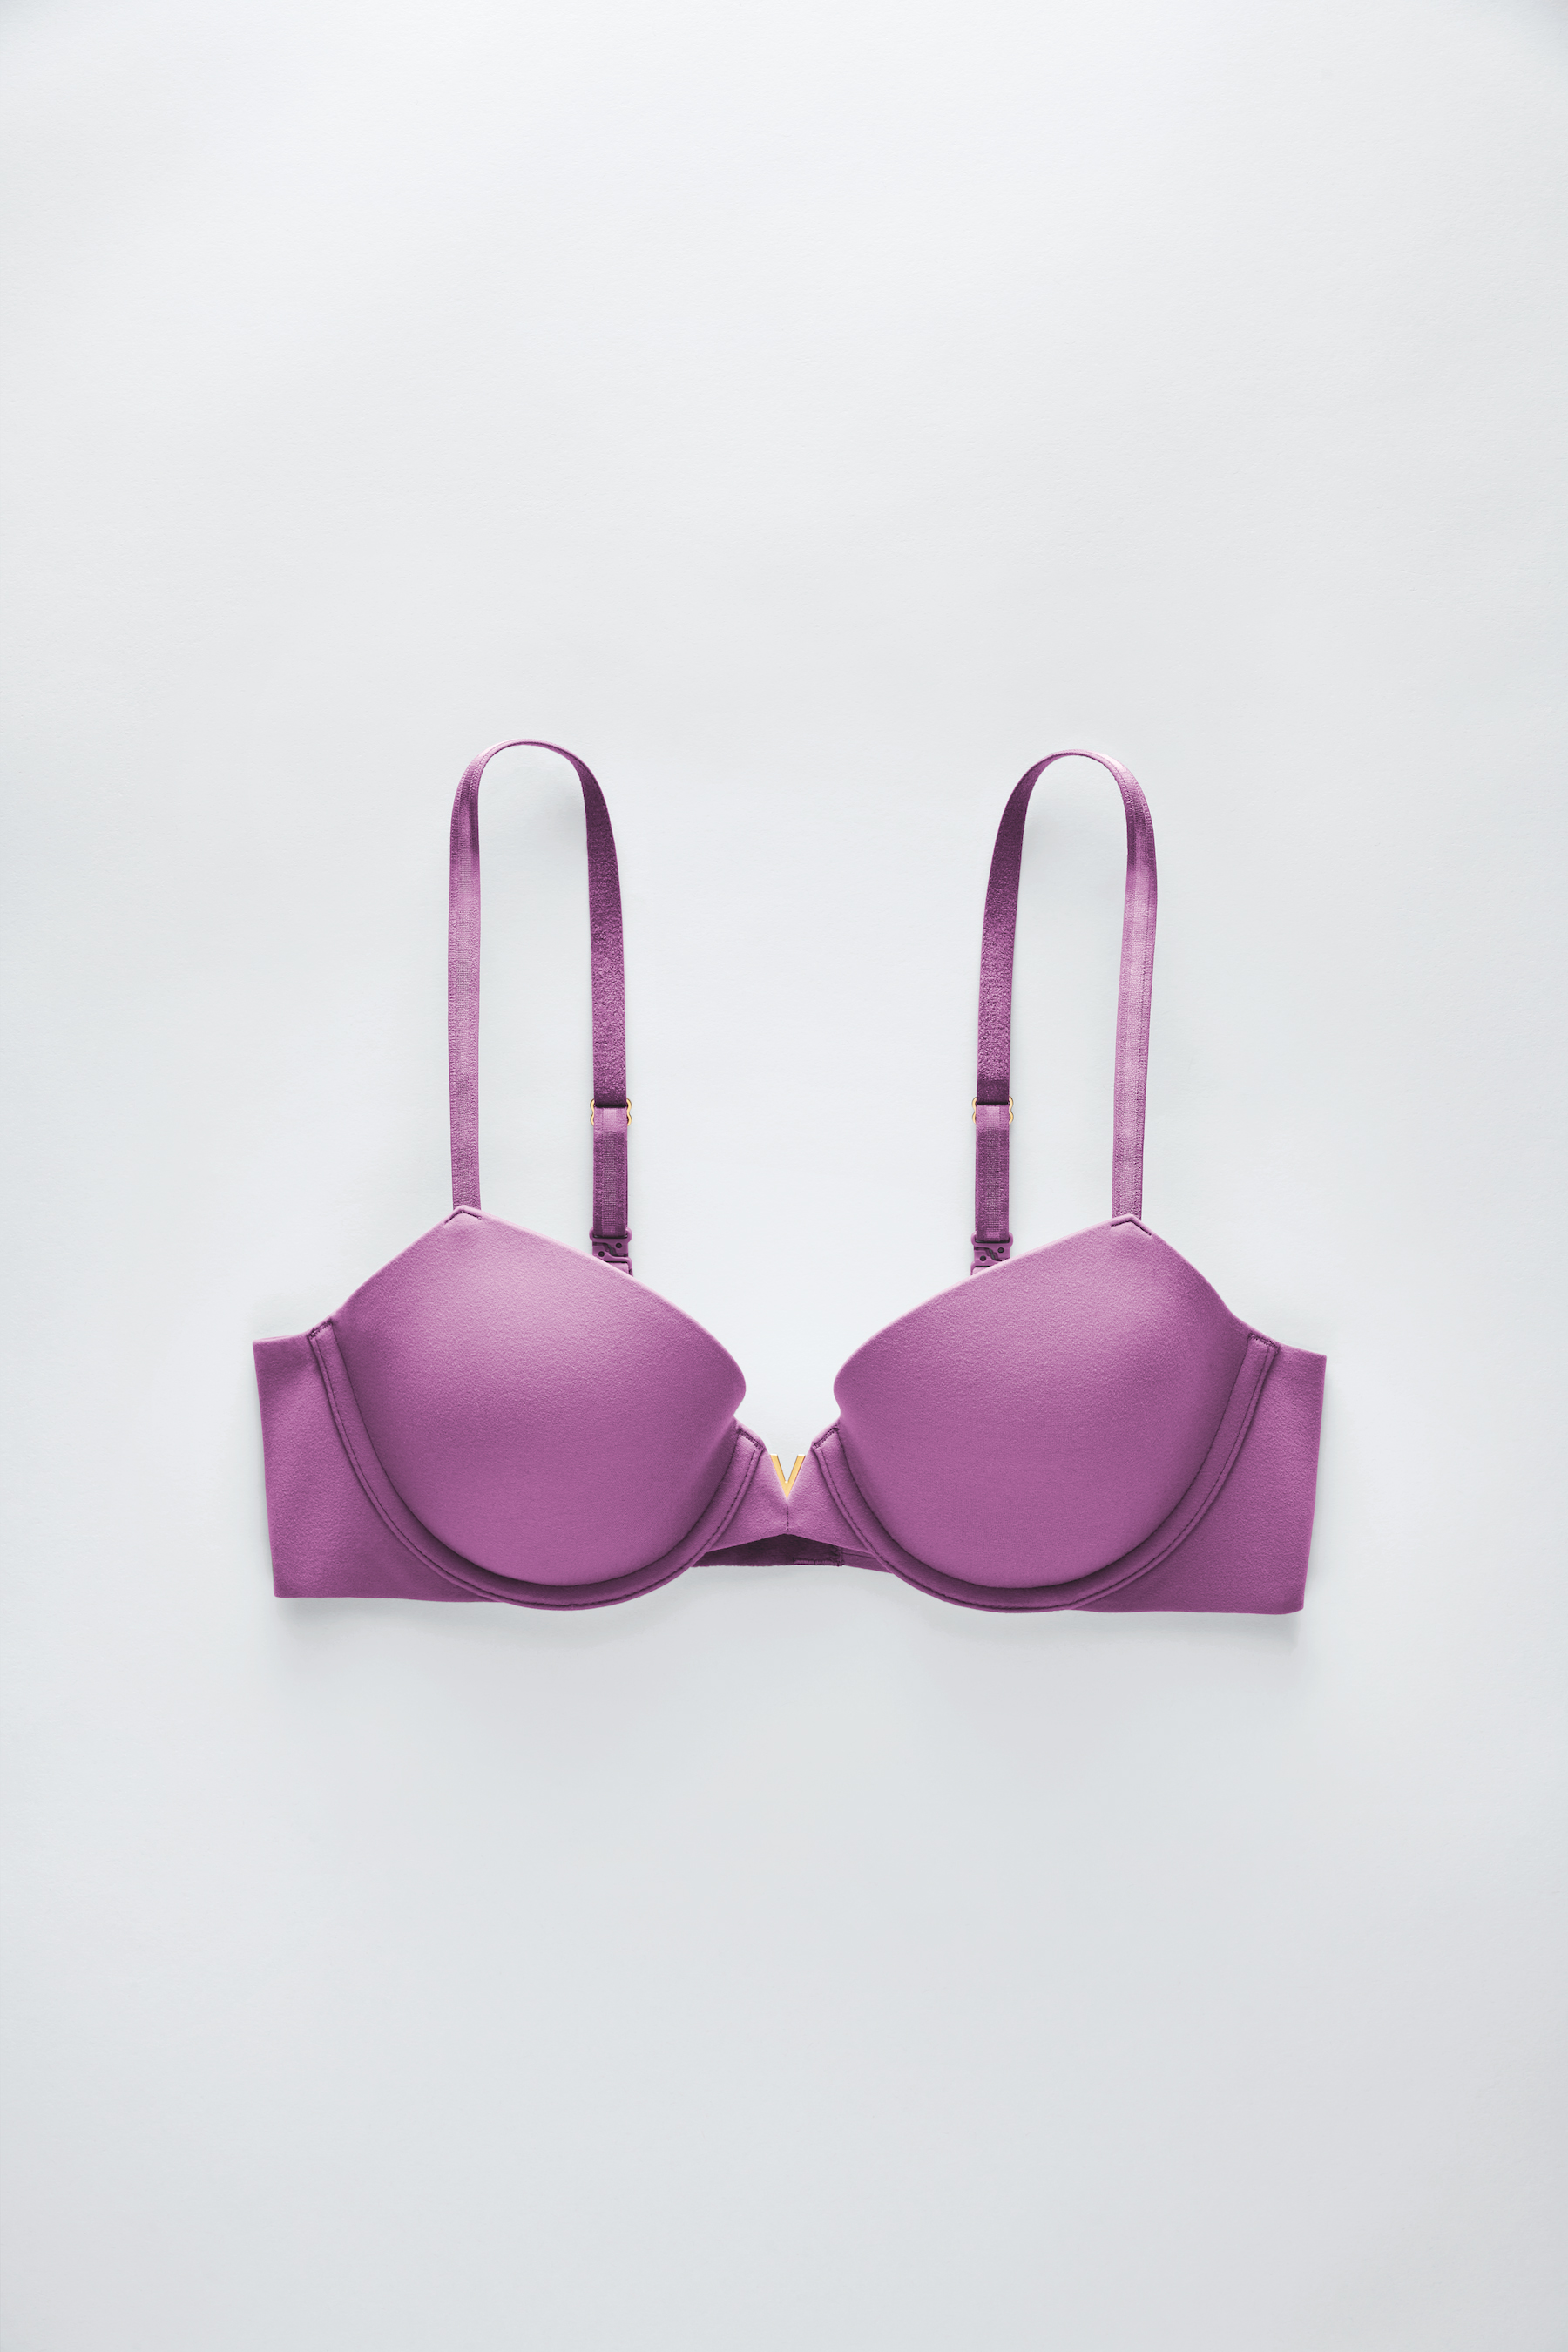 Semi Annual Sale: Bras from $14.99 44D The Love Cloud Collection